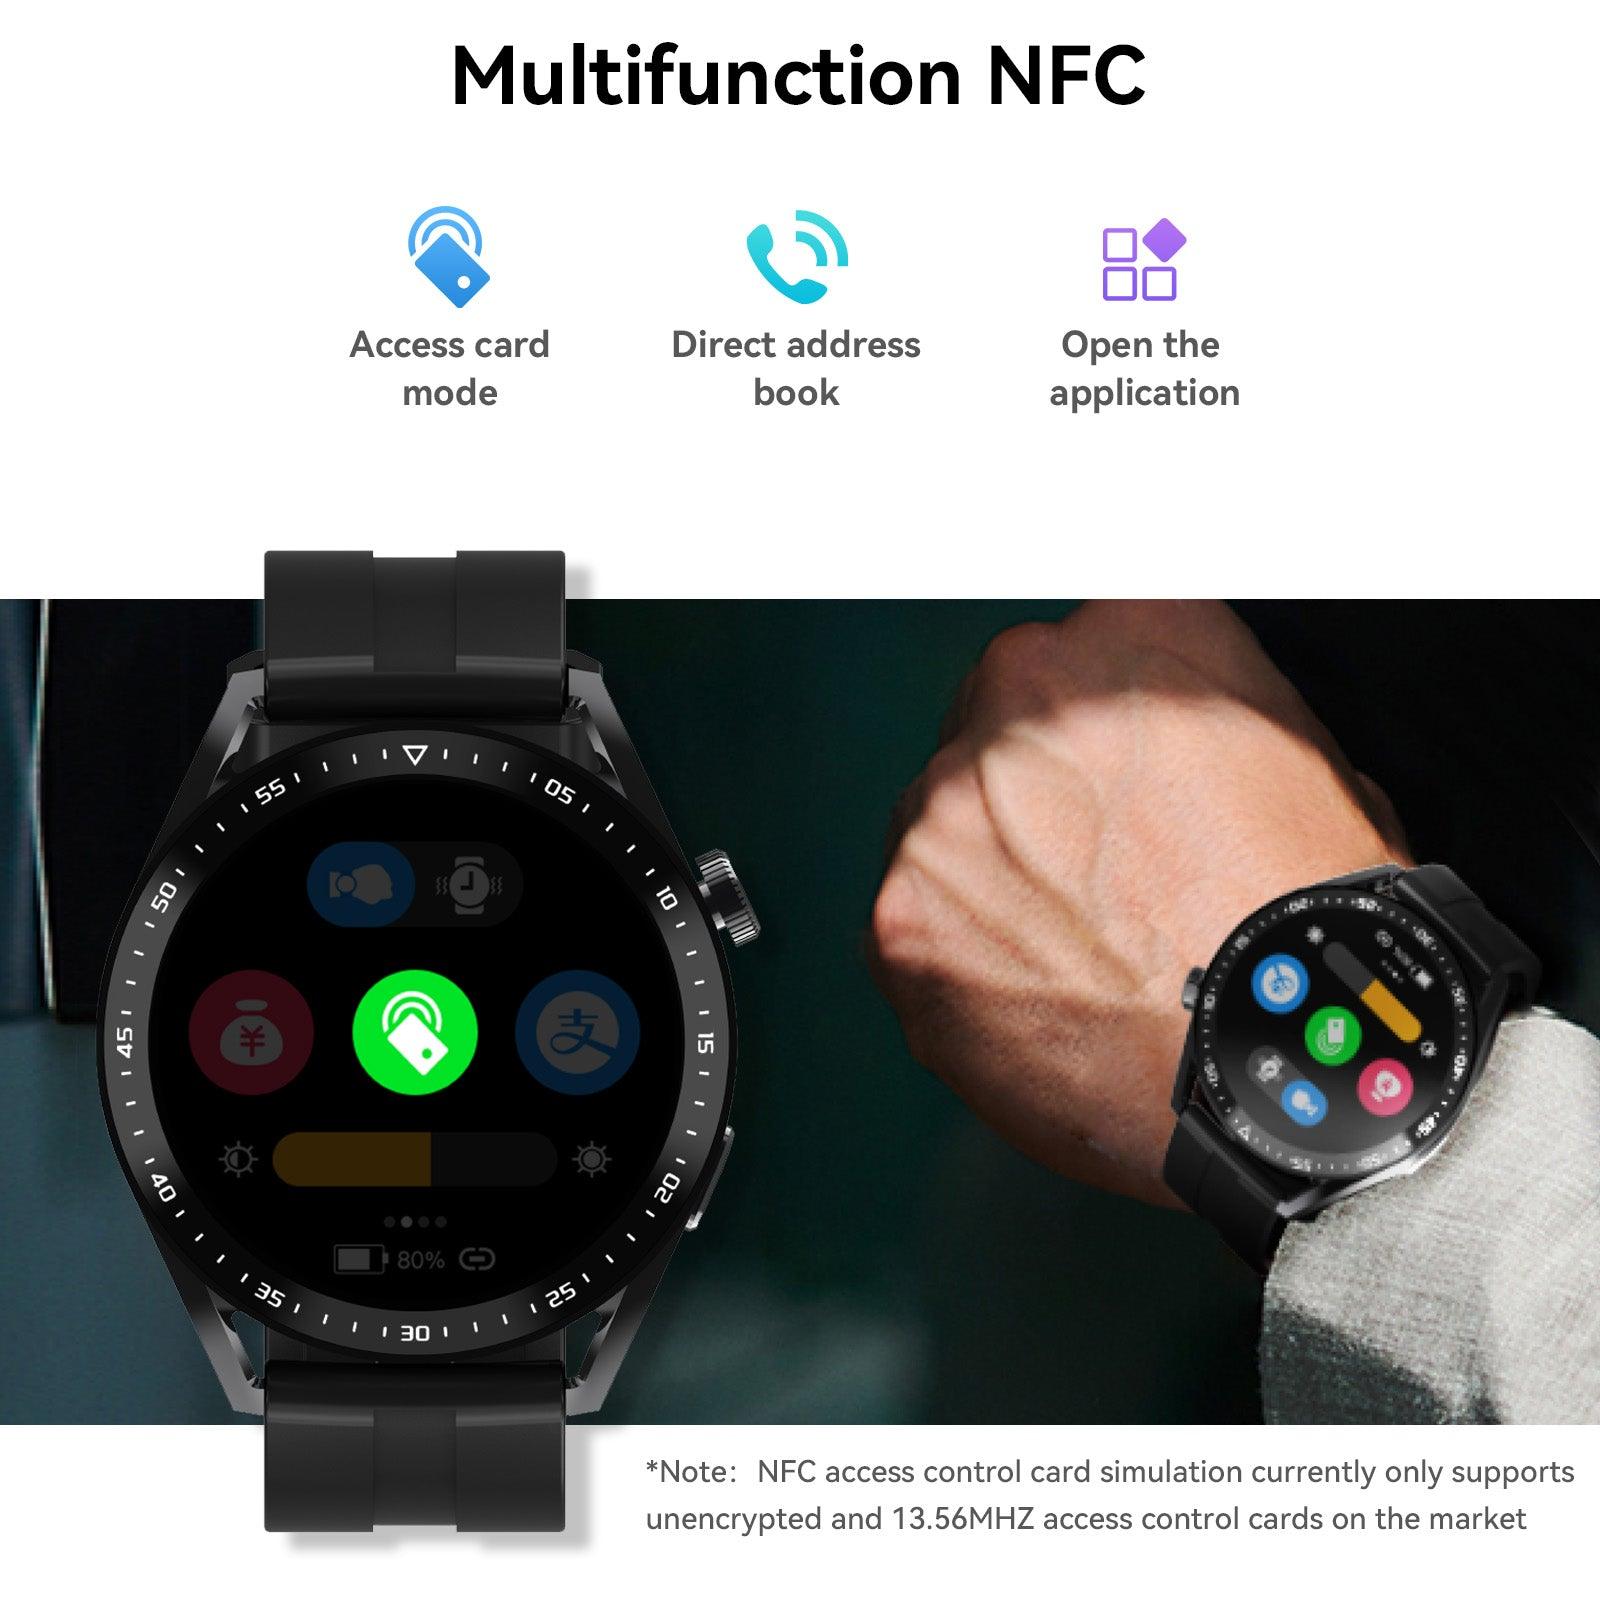 Mione MiW03 Smart Watch for Android iOS Phones Support QI Wireless Charging